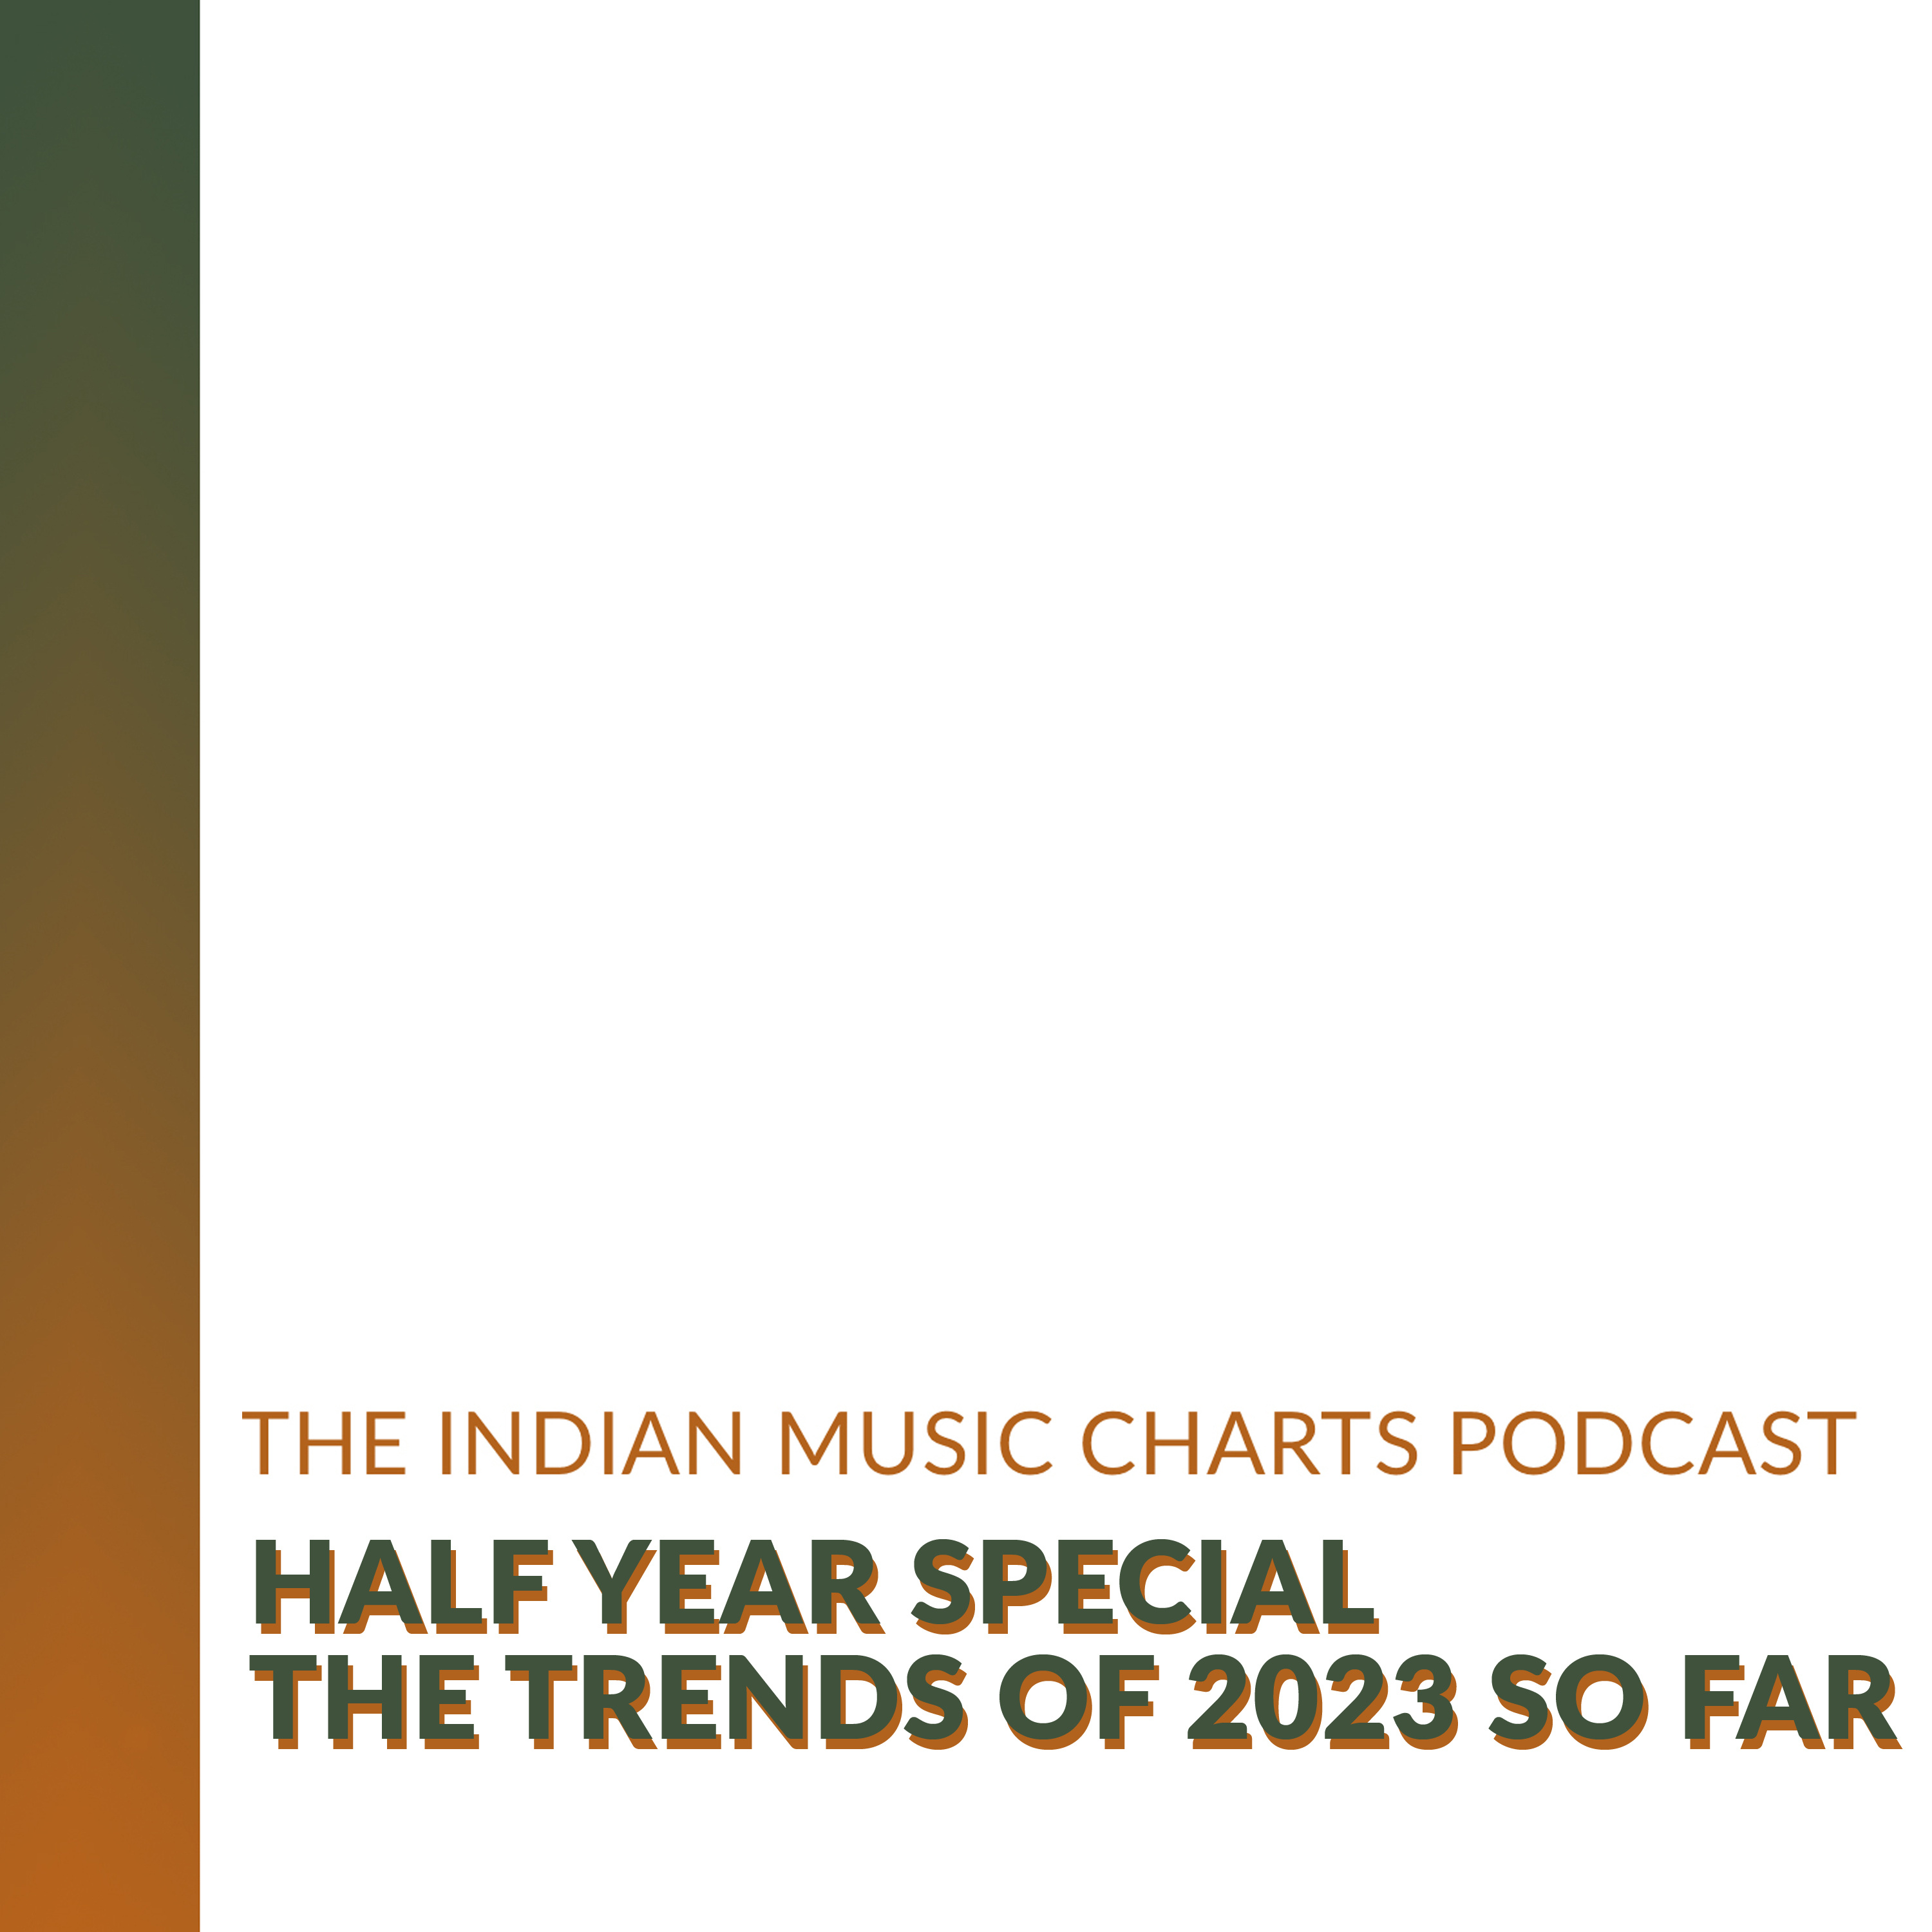 [Half-year Special] The trends of 2023 so far